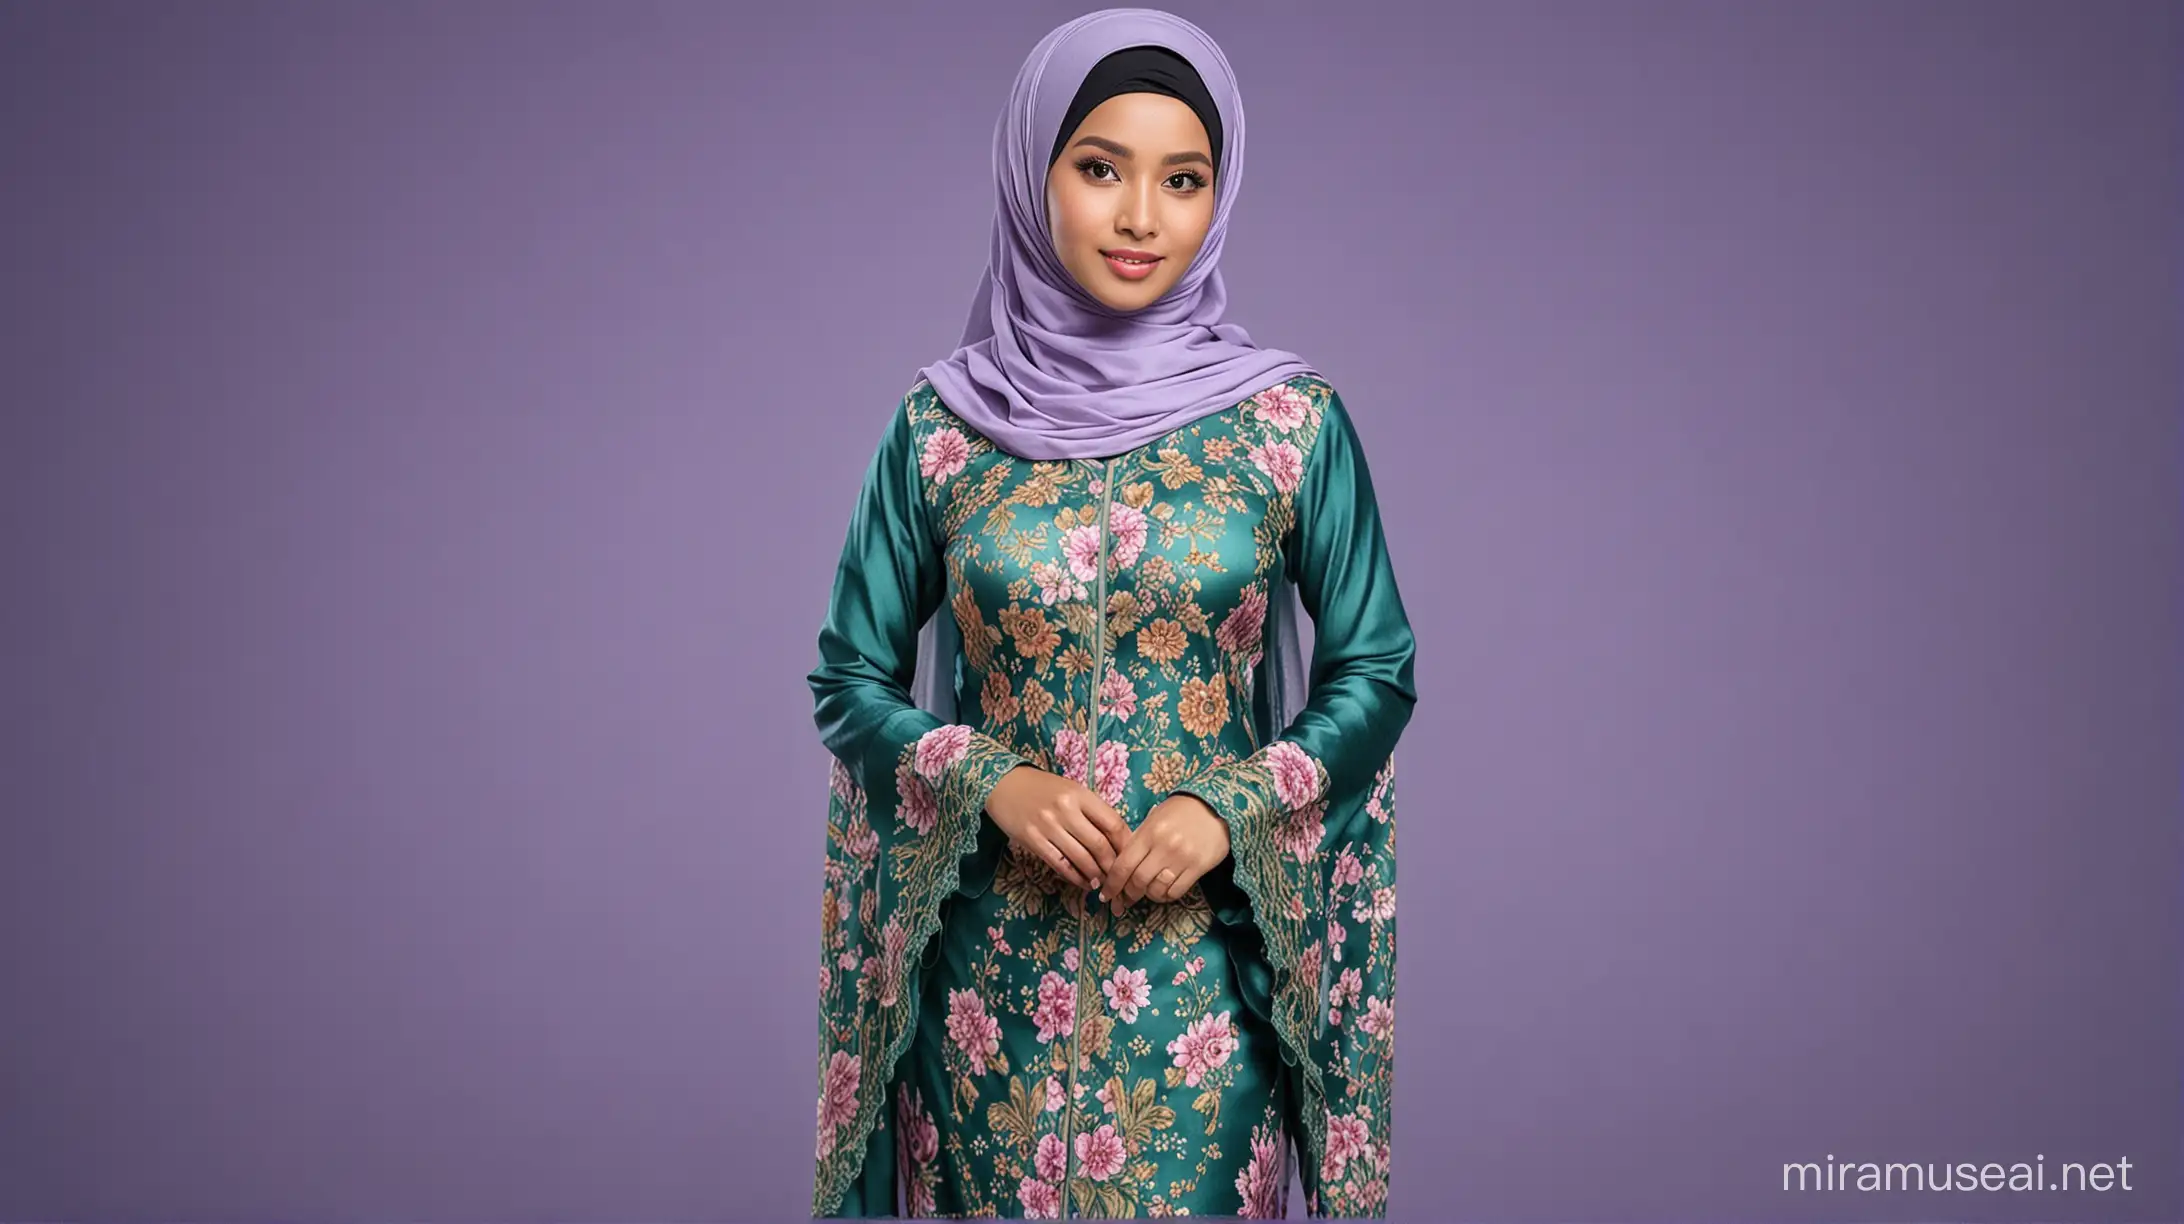 Elegant Malay Lady in Green and Lavender Kebaya with Glowing Eyes on Blue Background